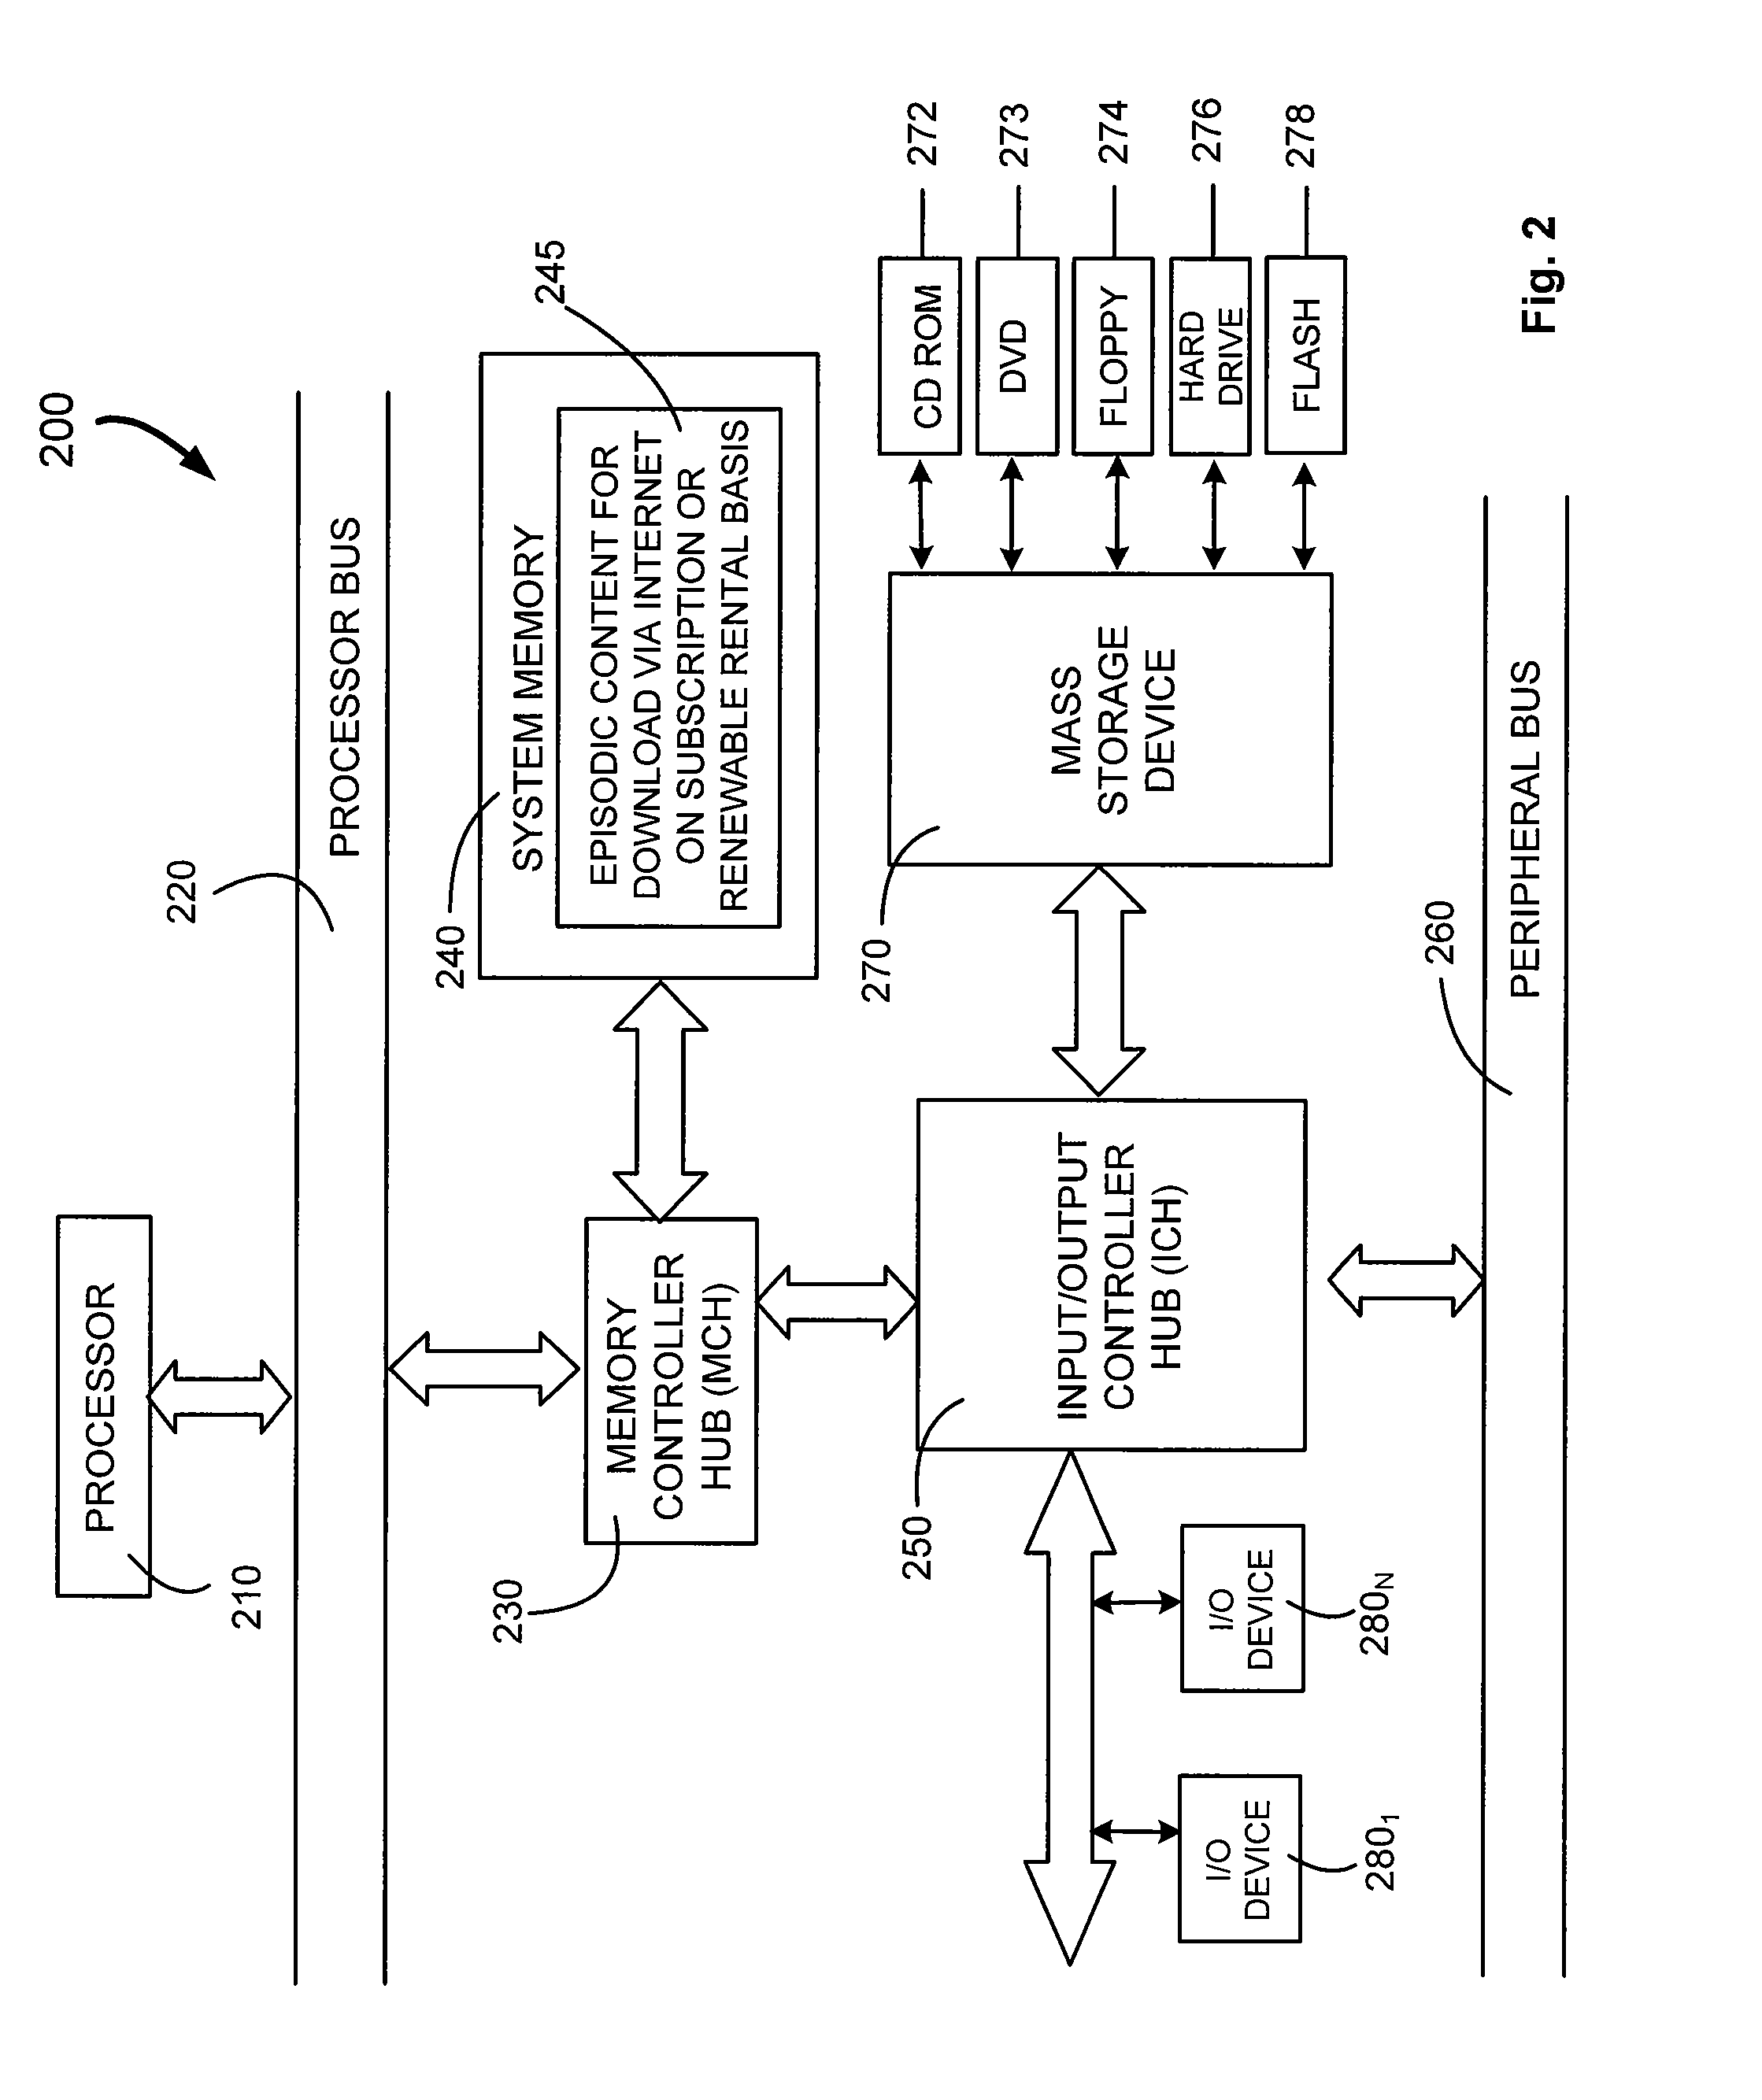 Method of inserting promotional content within downloaded video content